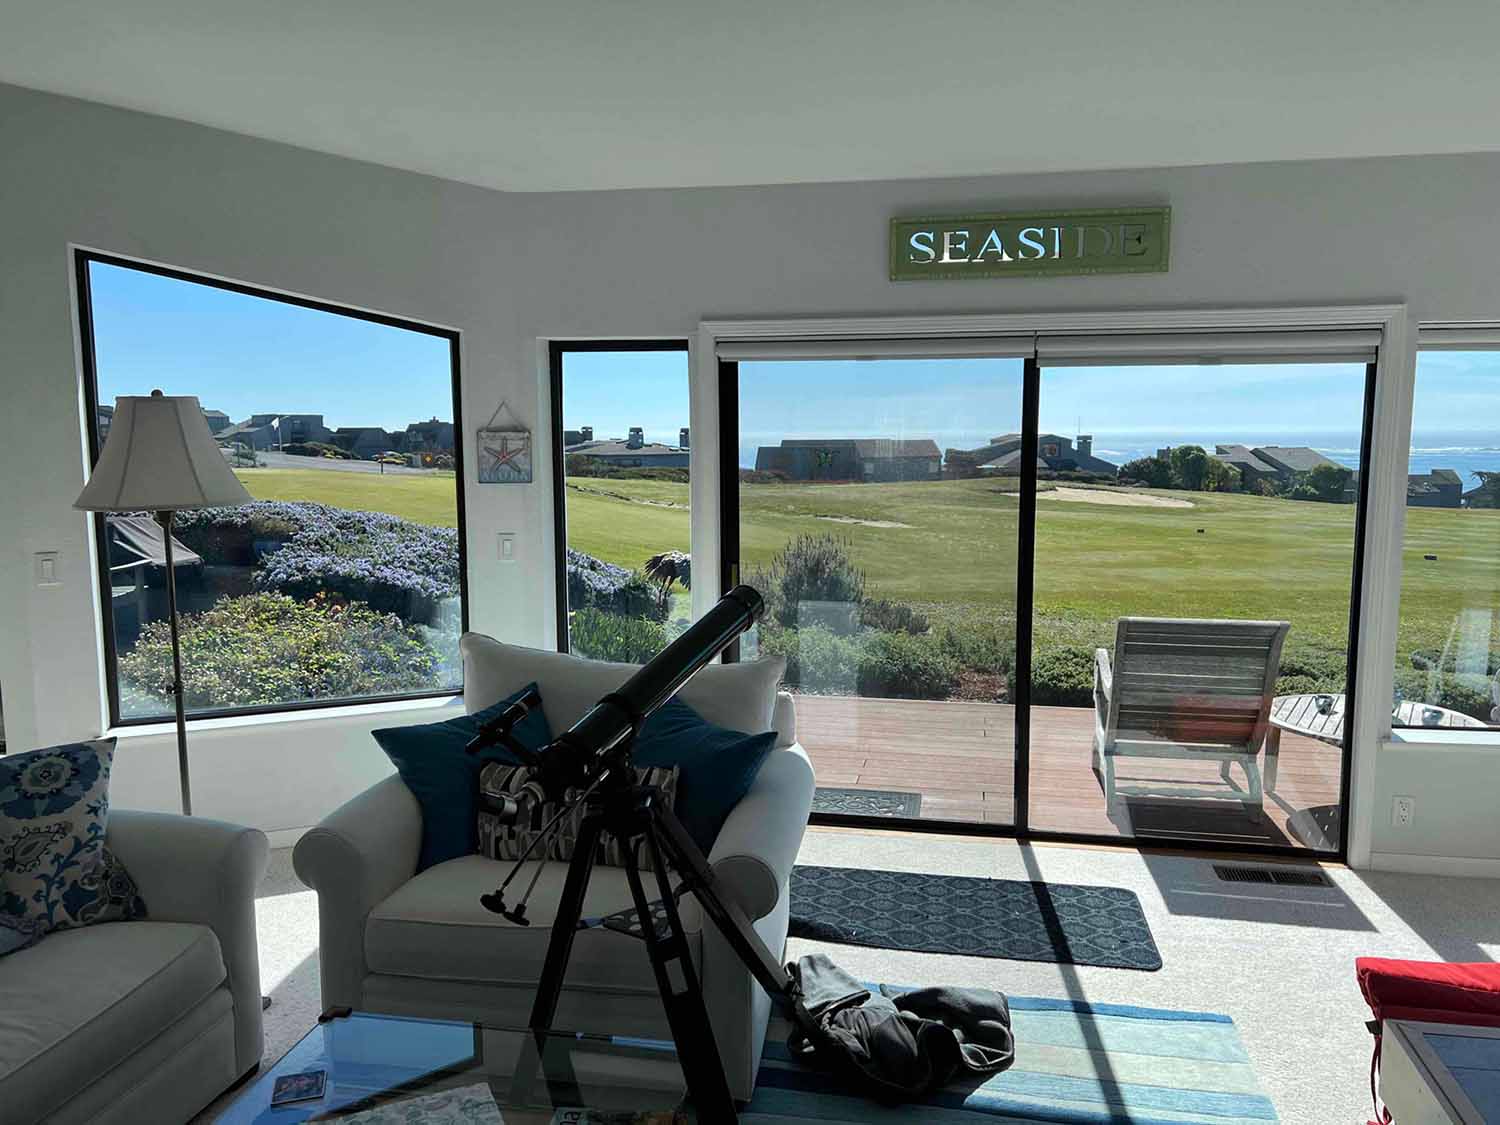 Sun Control Window Film for Bodega Bay Homes, installed by ClimatePro. Get a free estimate today.